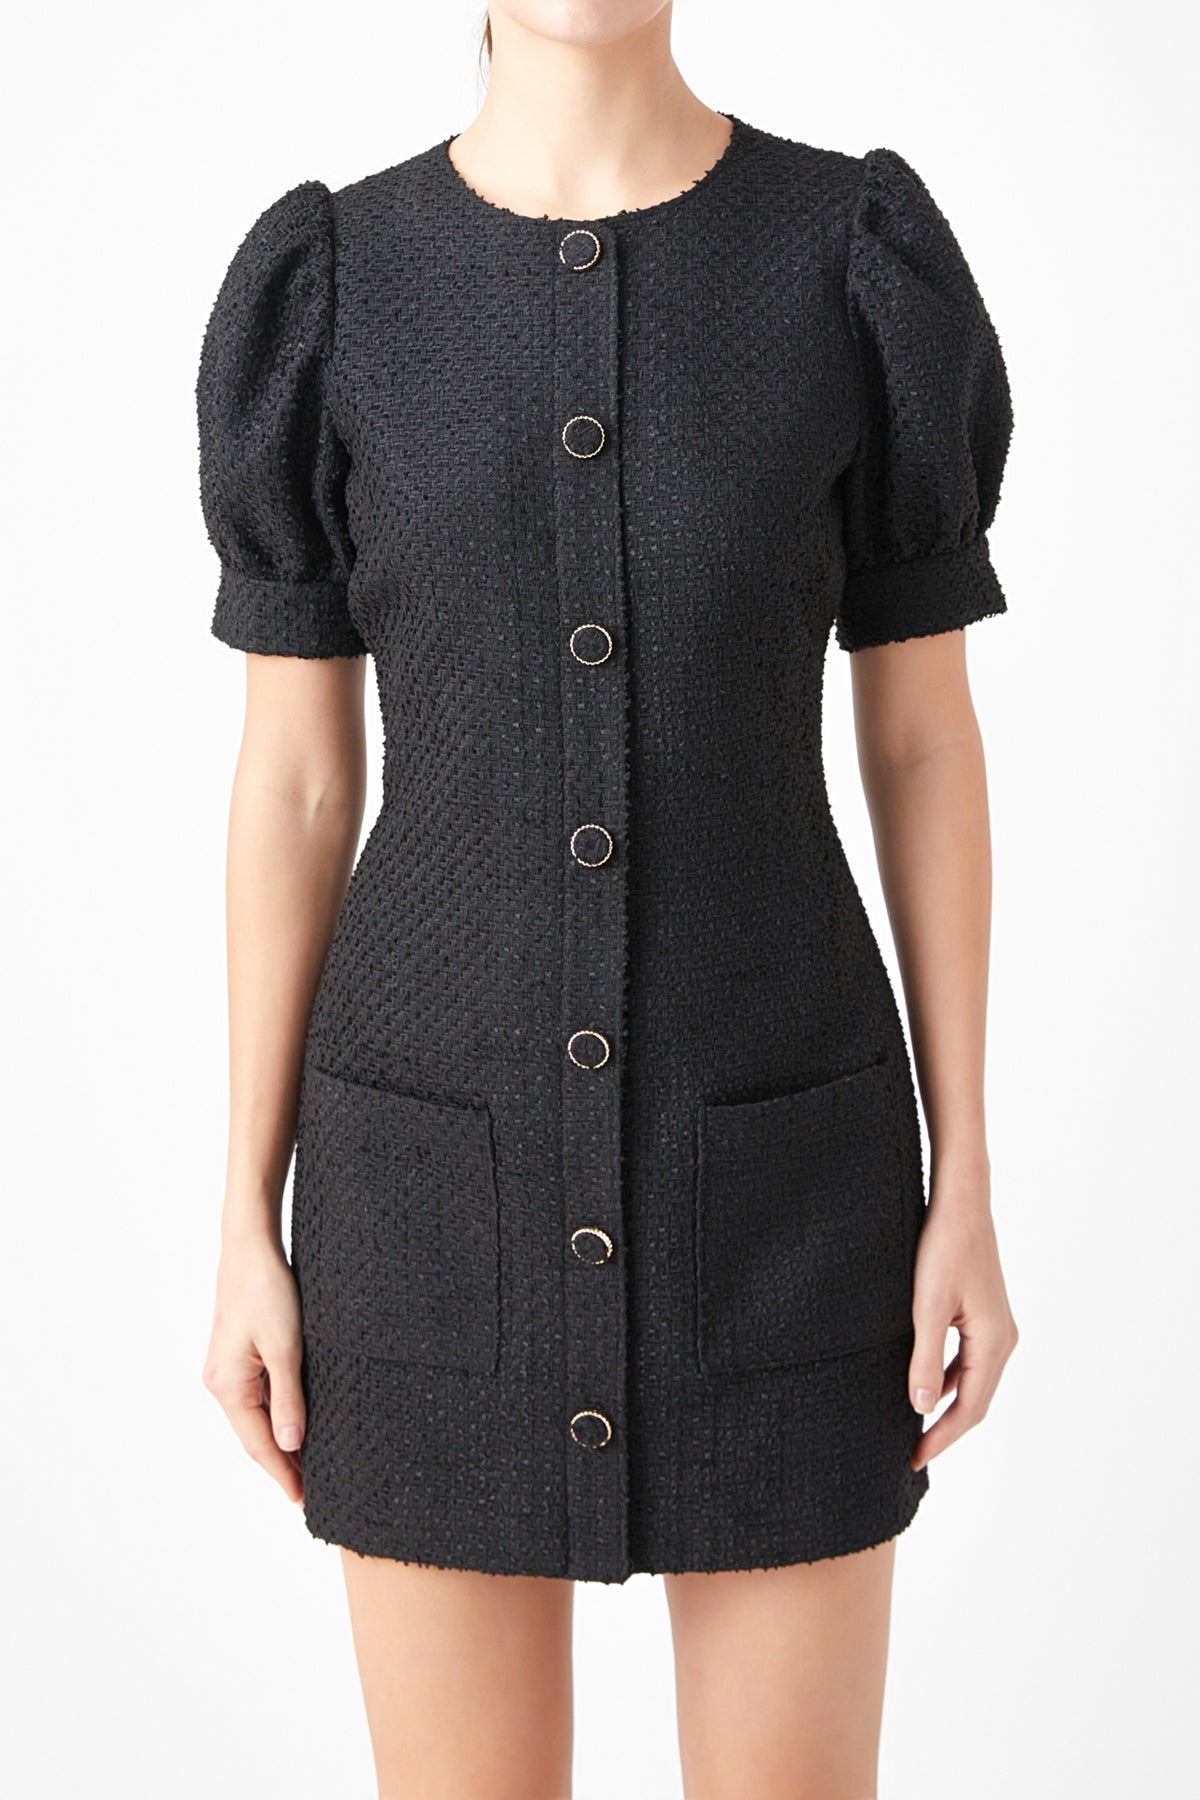 ENDLESS ROSE - Tweed Puff Sleeve Mini Dress - DRESSES available at Objectrare